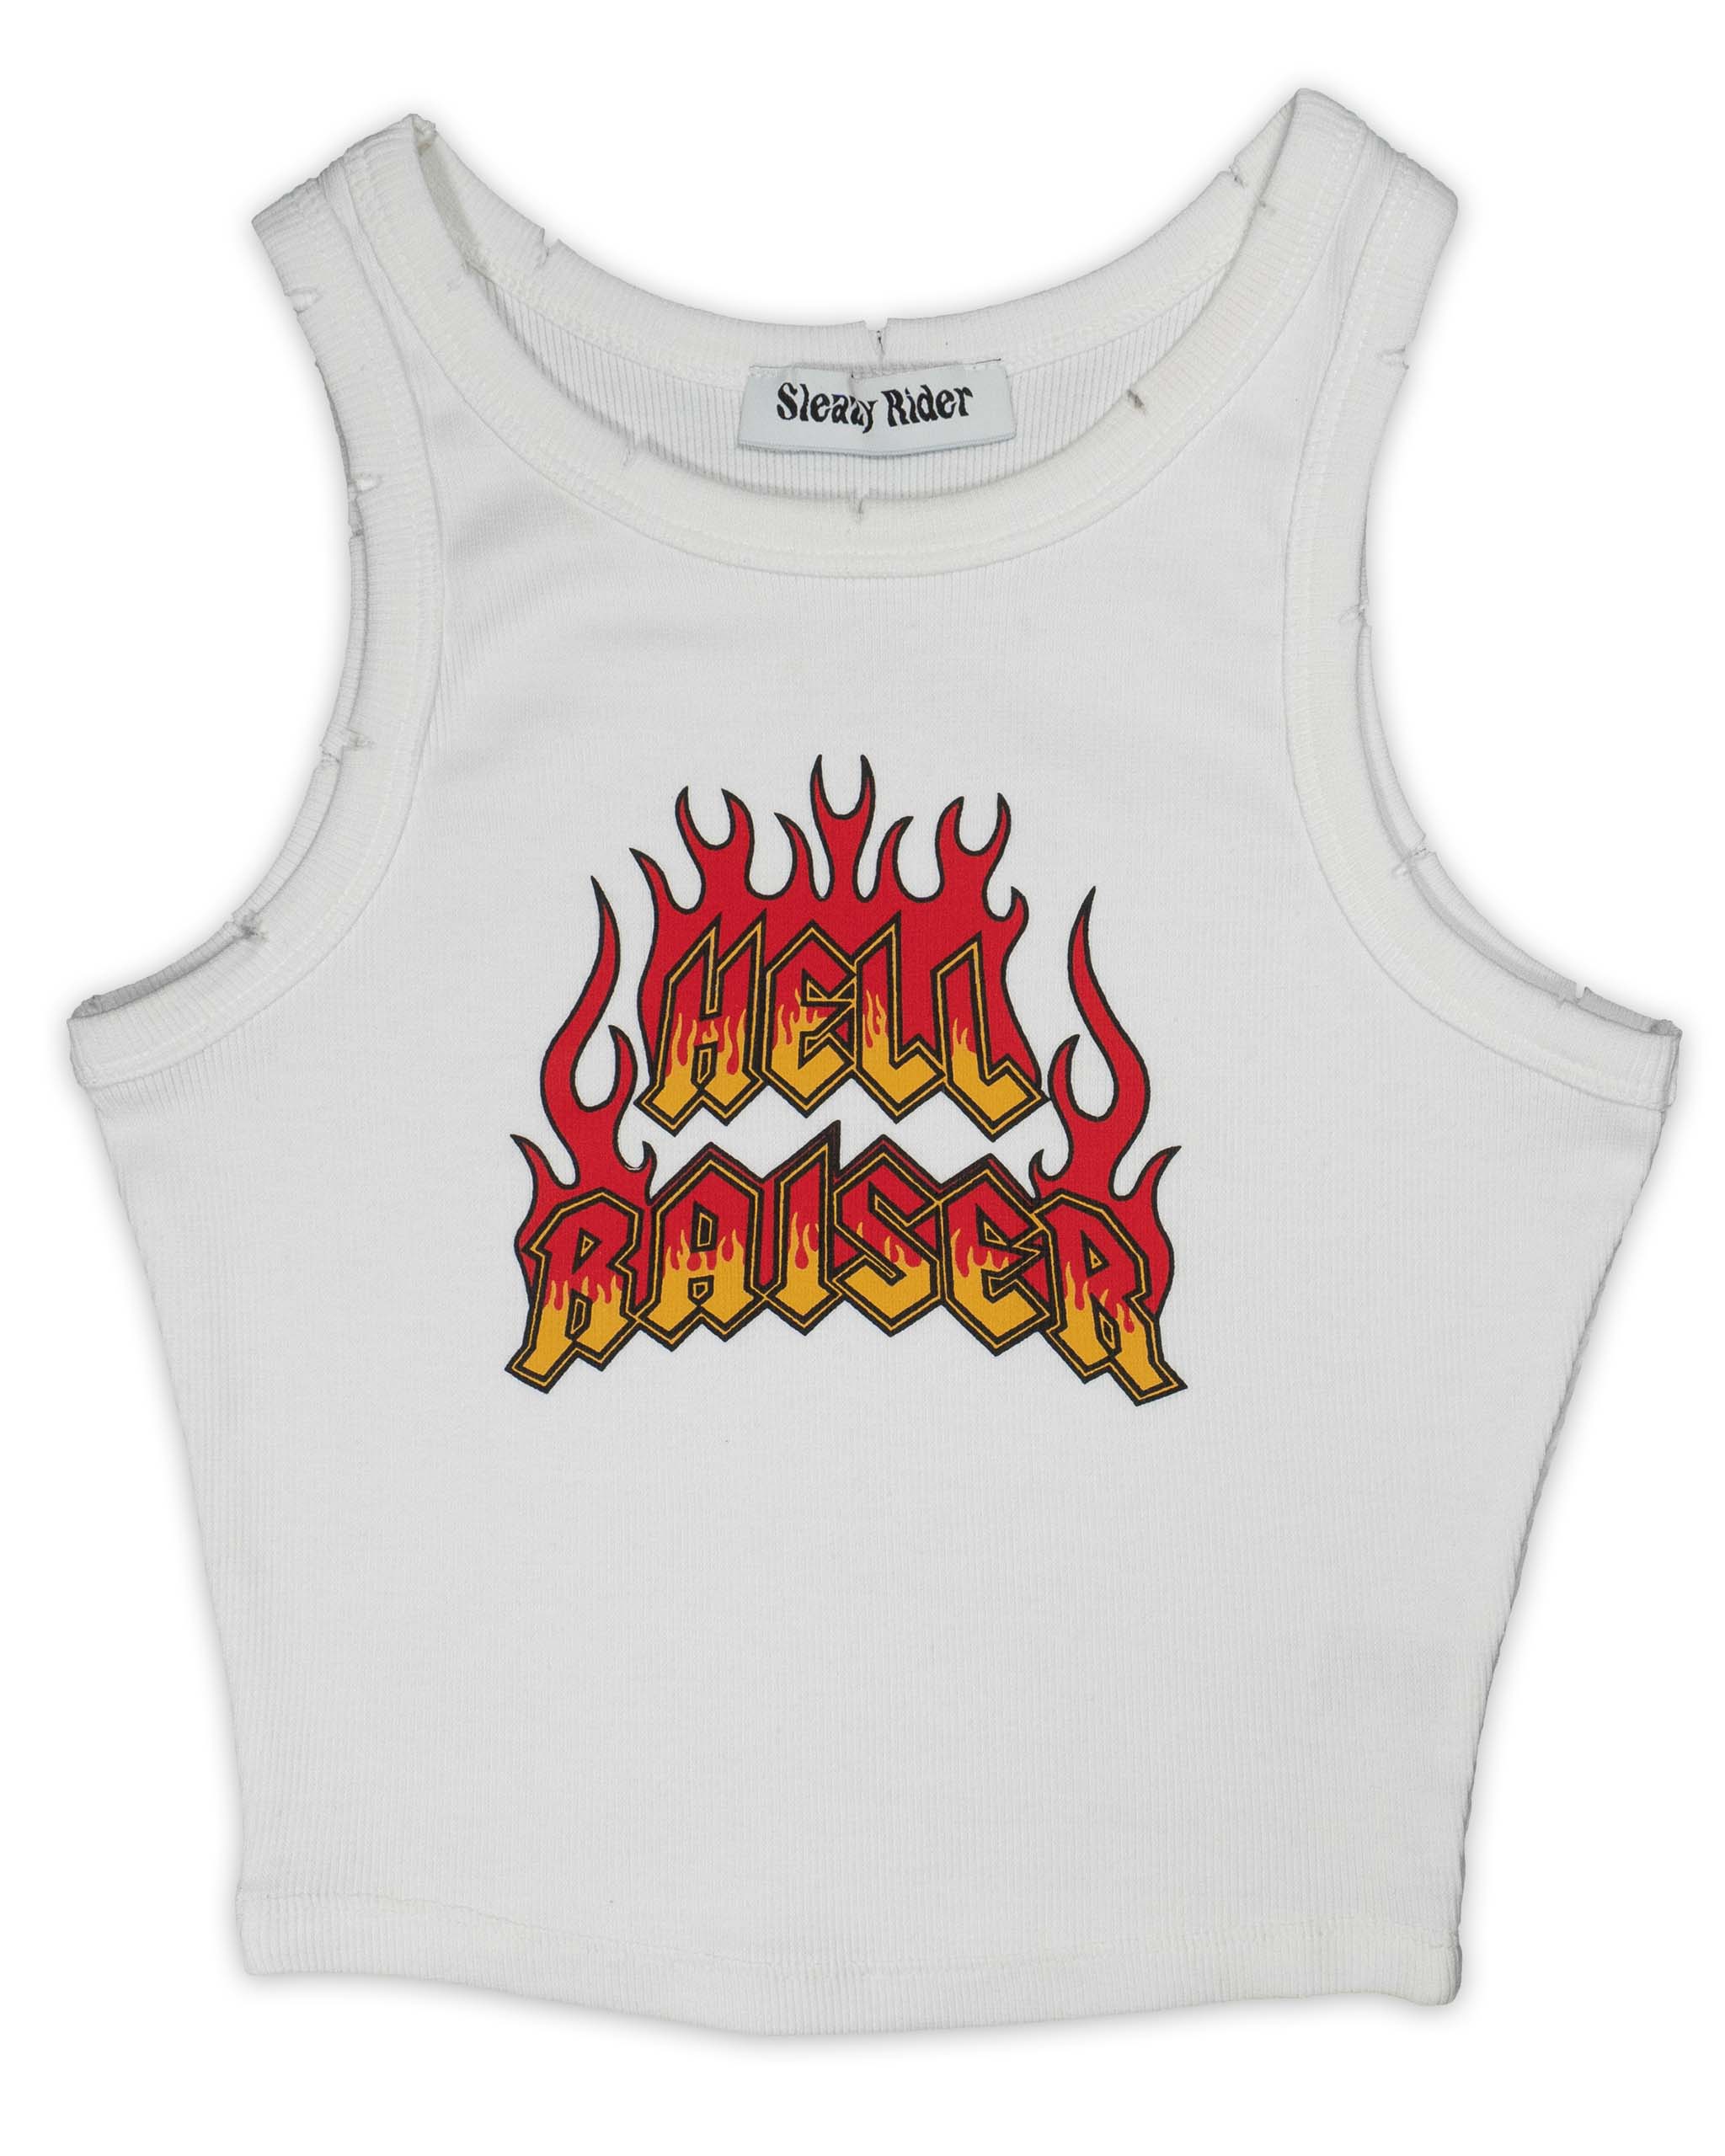 Hell Raiser tank top by Sleazy Rider